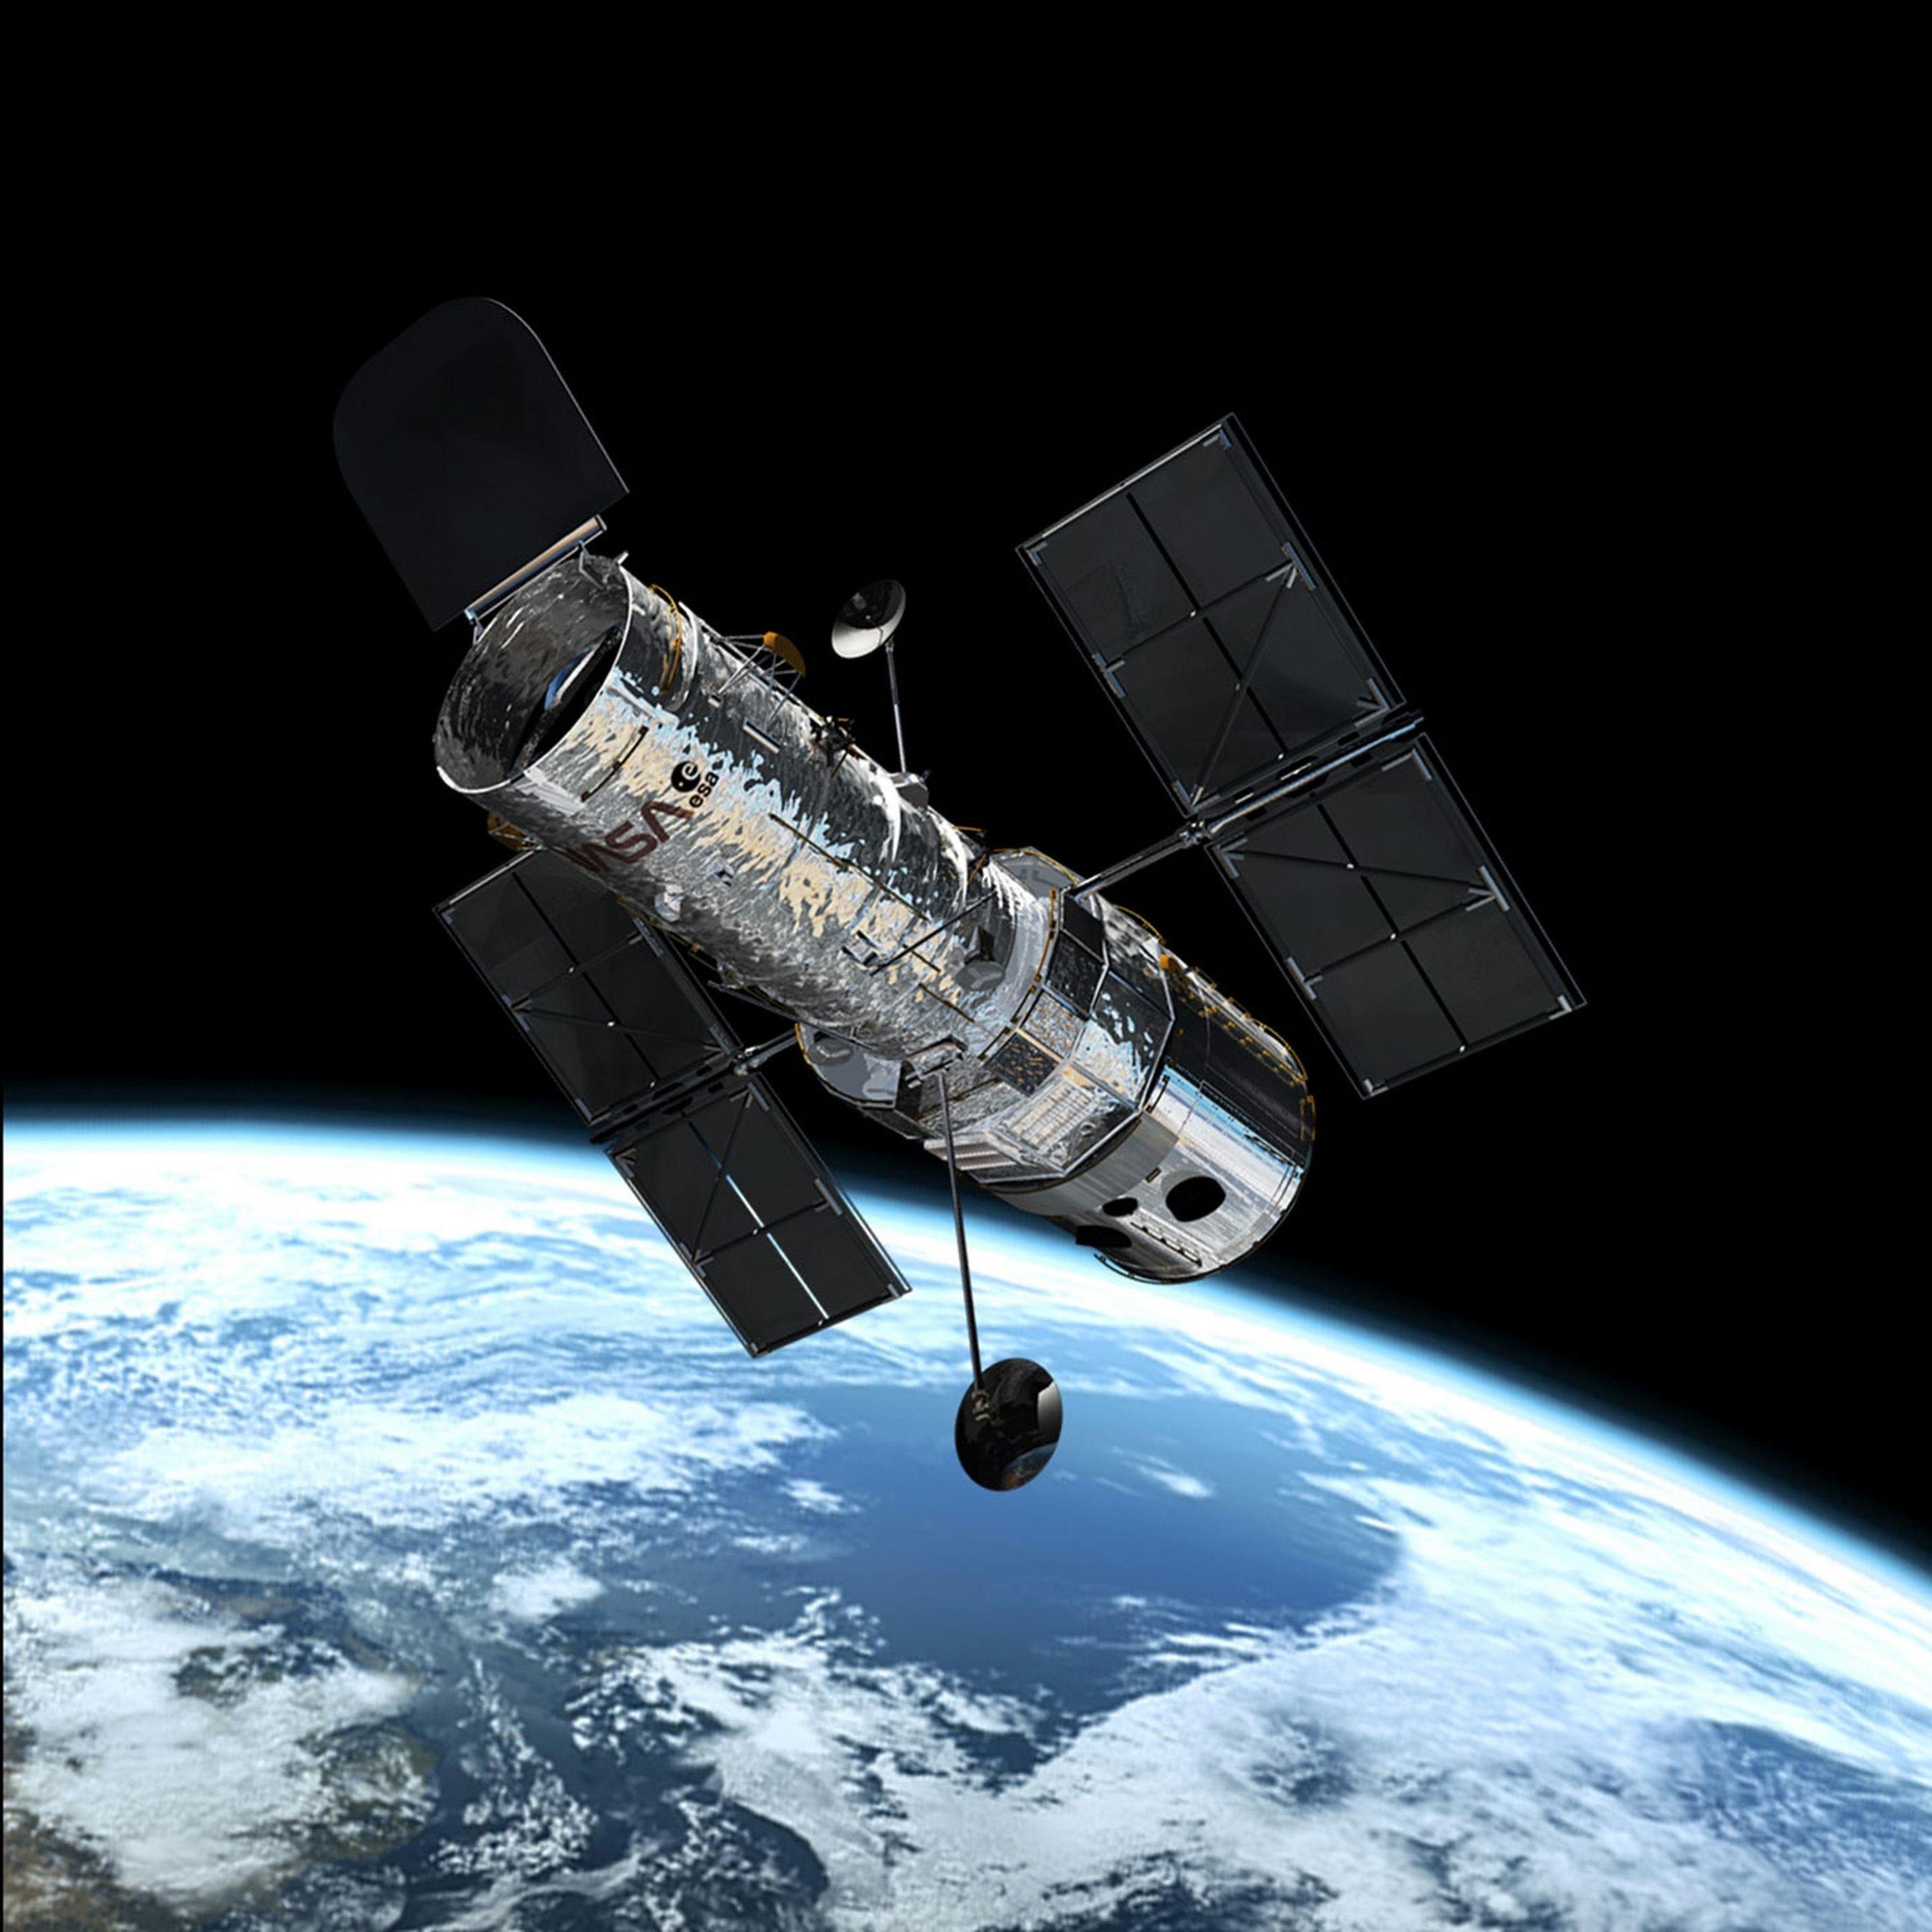 Hubble at 30: how the space telescope changed astronomy forever